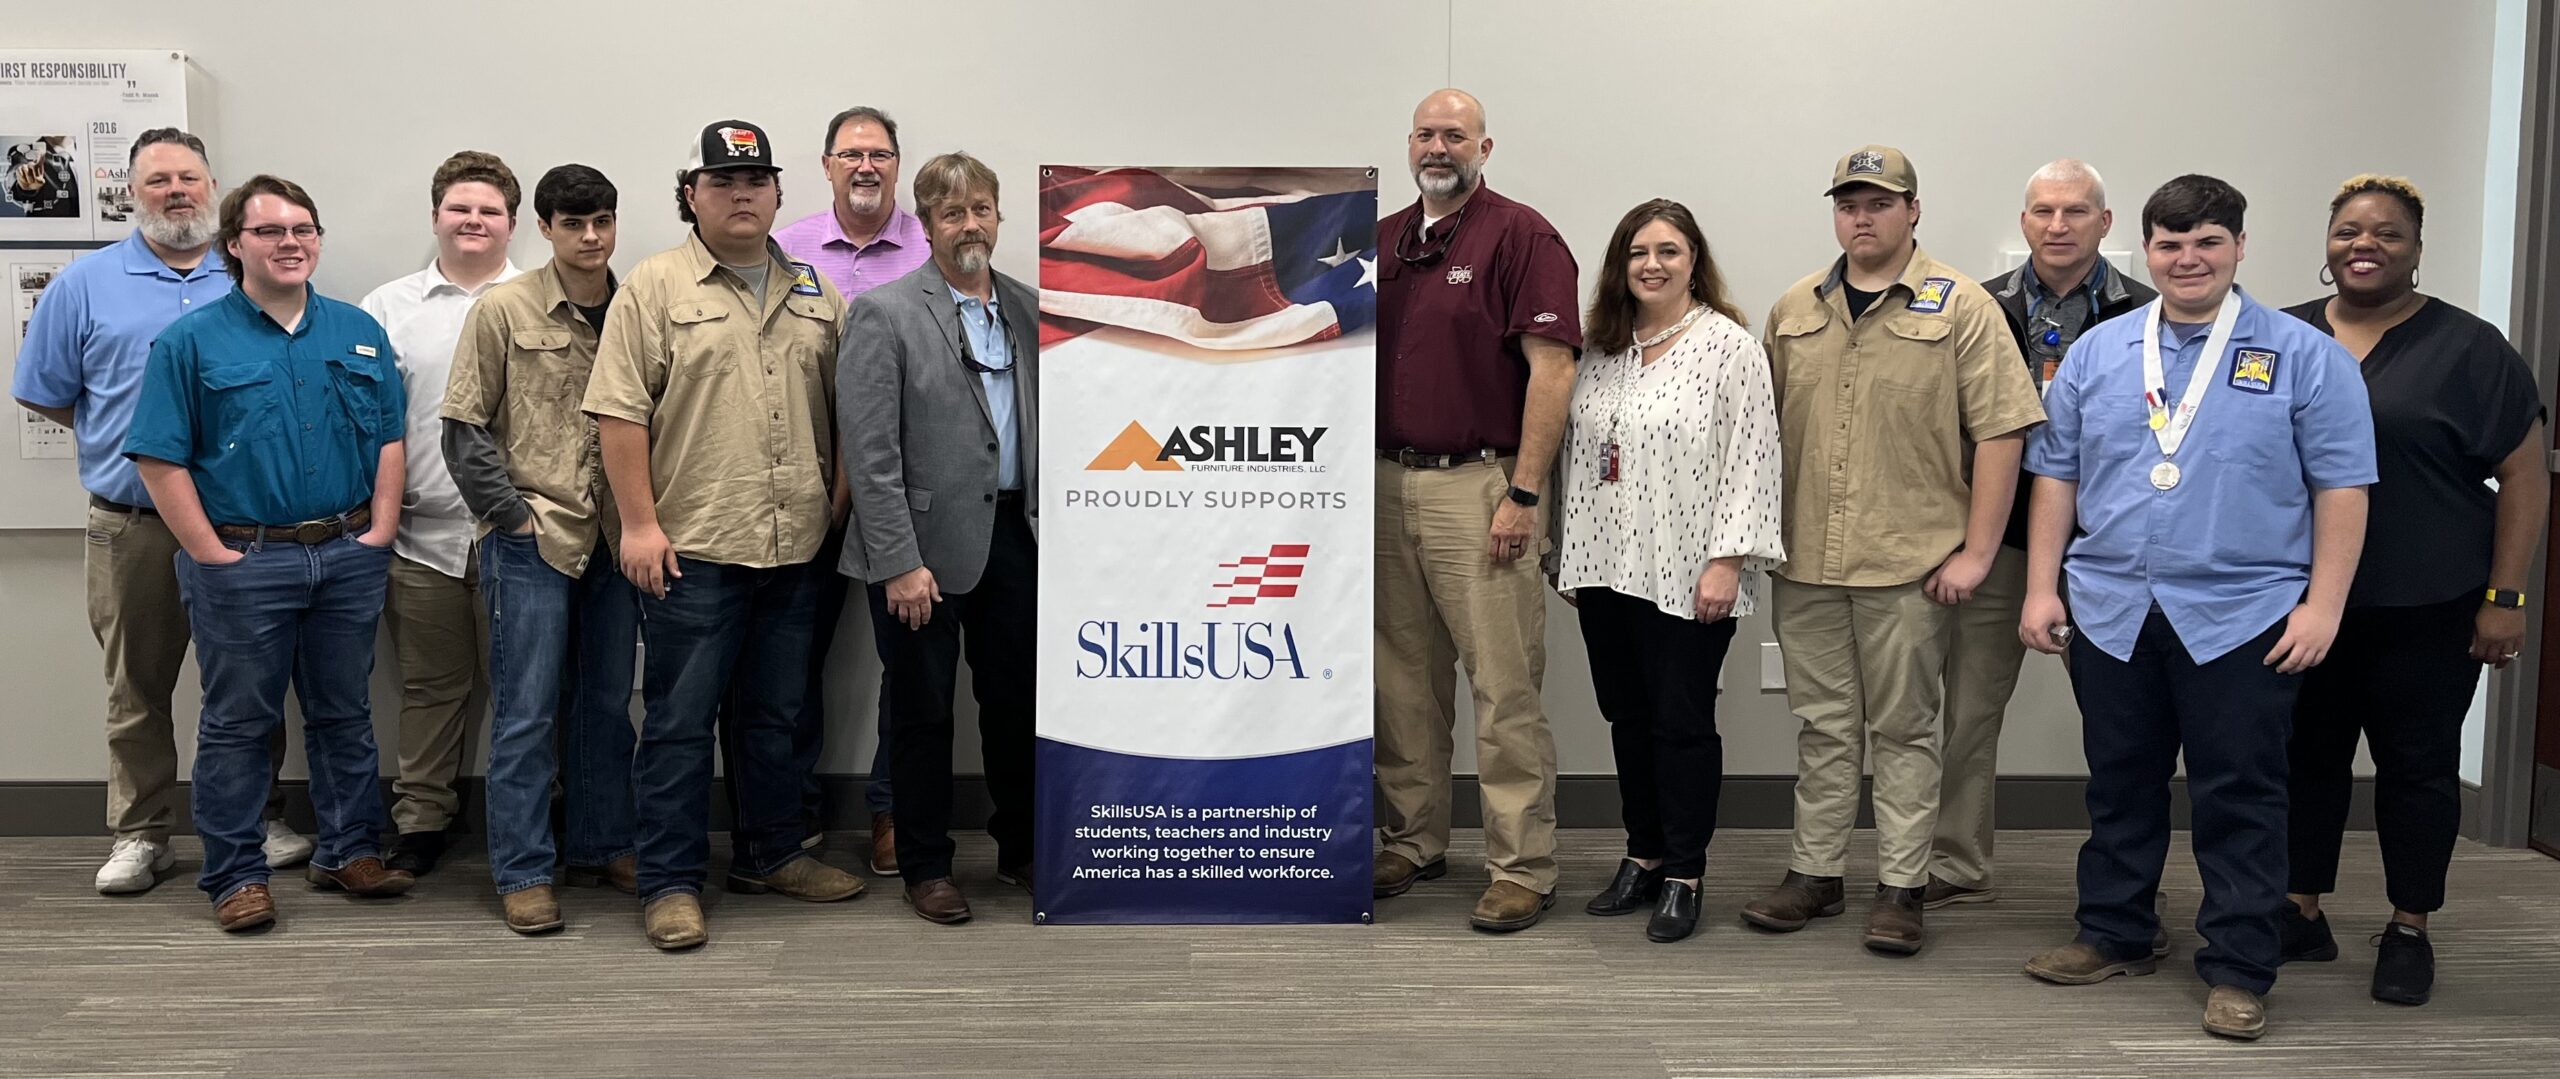 On Friday, April 22, the New Albany School of Career & Technical Education was presented a $10,000 grant to assist with the SkillsUSA student organization. During the event, students and instructors learned more about Ashley Furniture and the footprint the corporation has across our nation, as well as globally. Students were given a tour of the Ashley manufacturing facility in Ecru and learned about the advanced manufacturing and logistics career sectors.